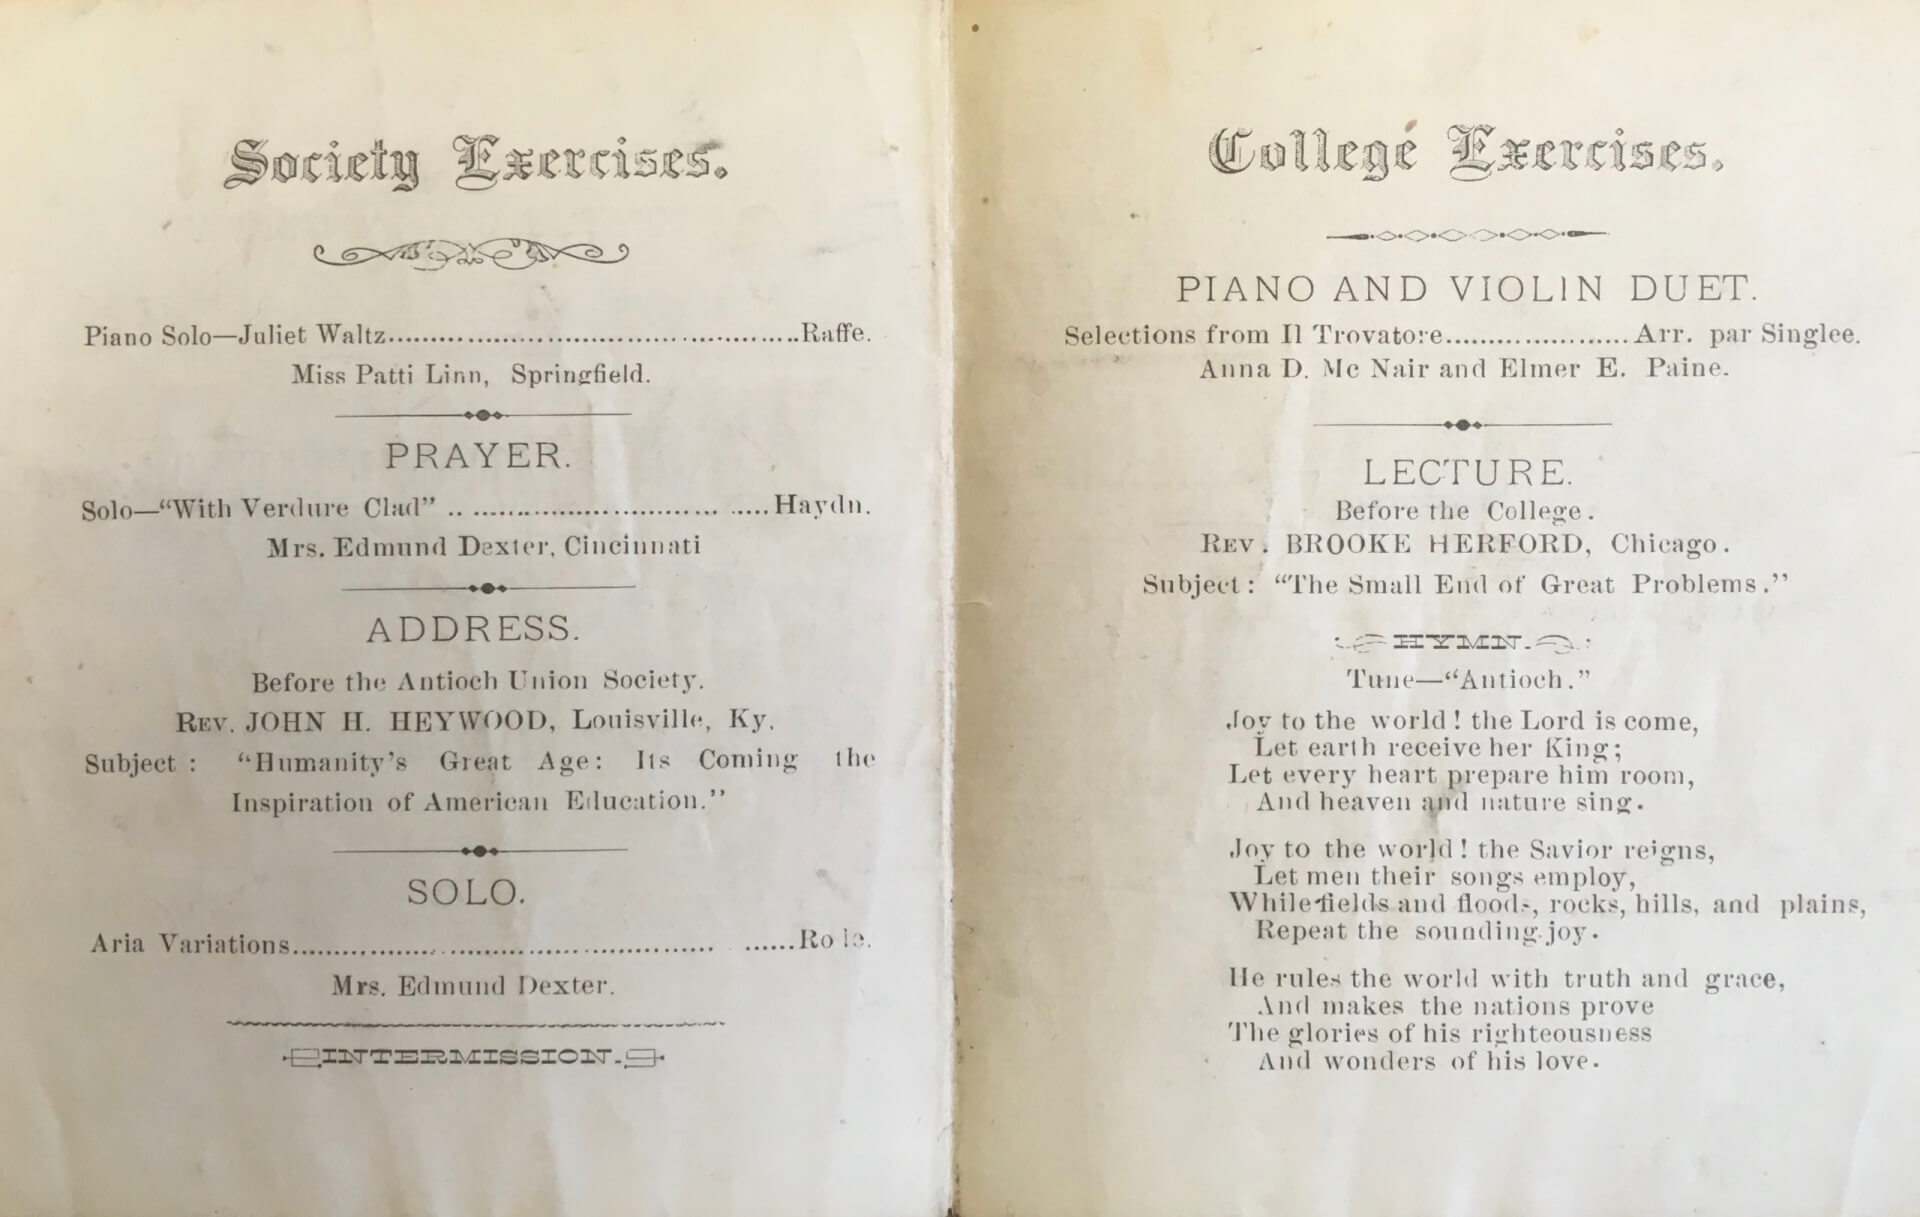 Commencement program from 1880 inside including society exercises and college exercises